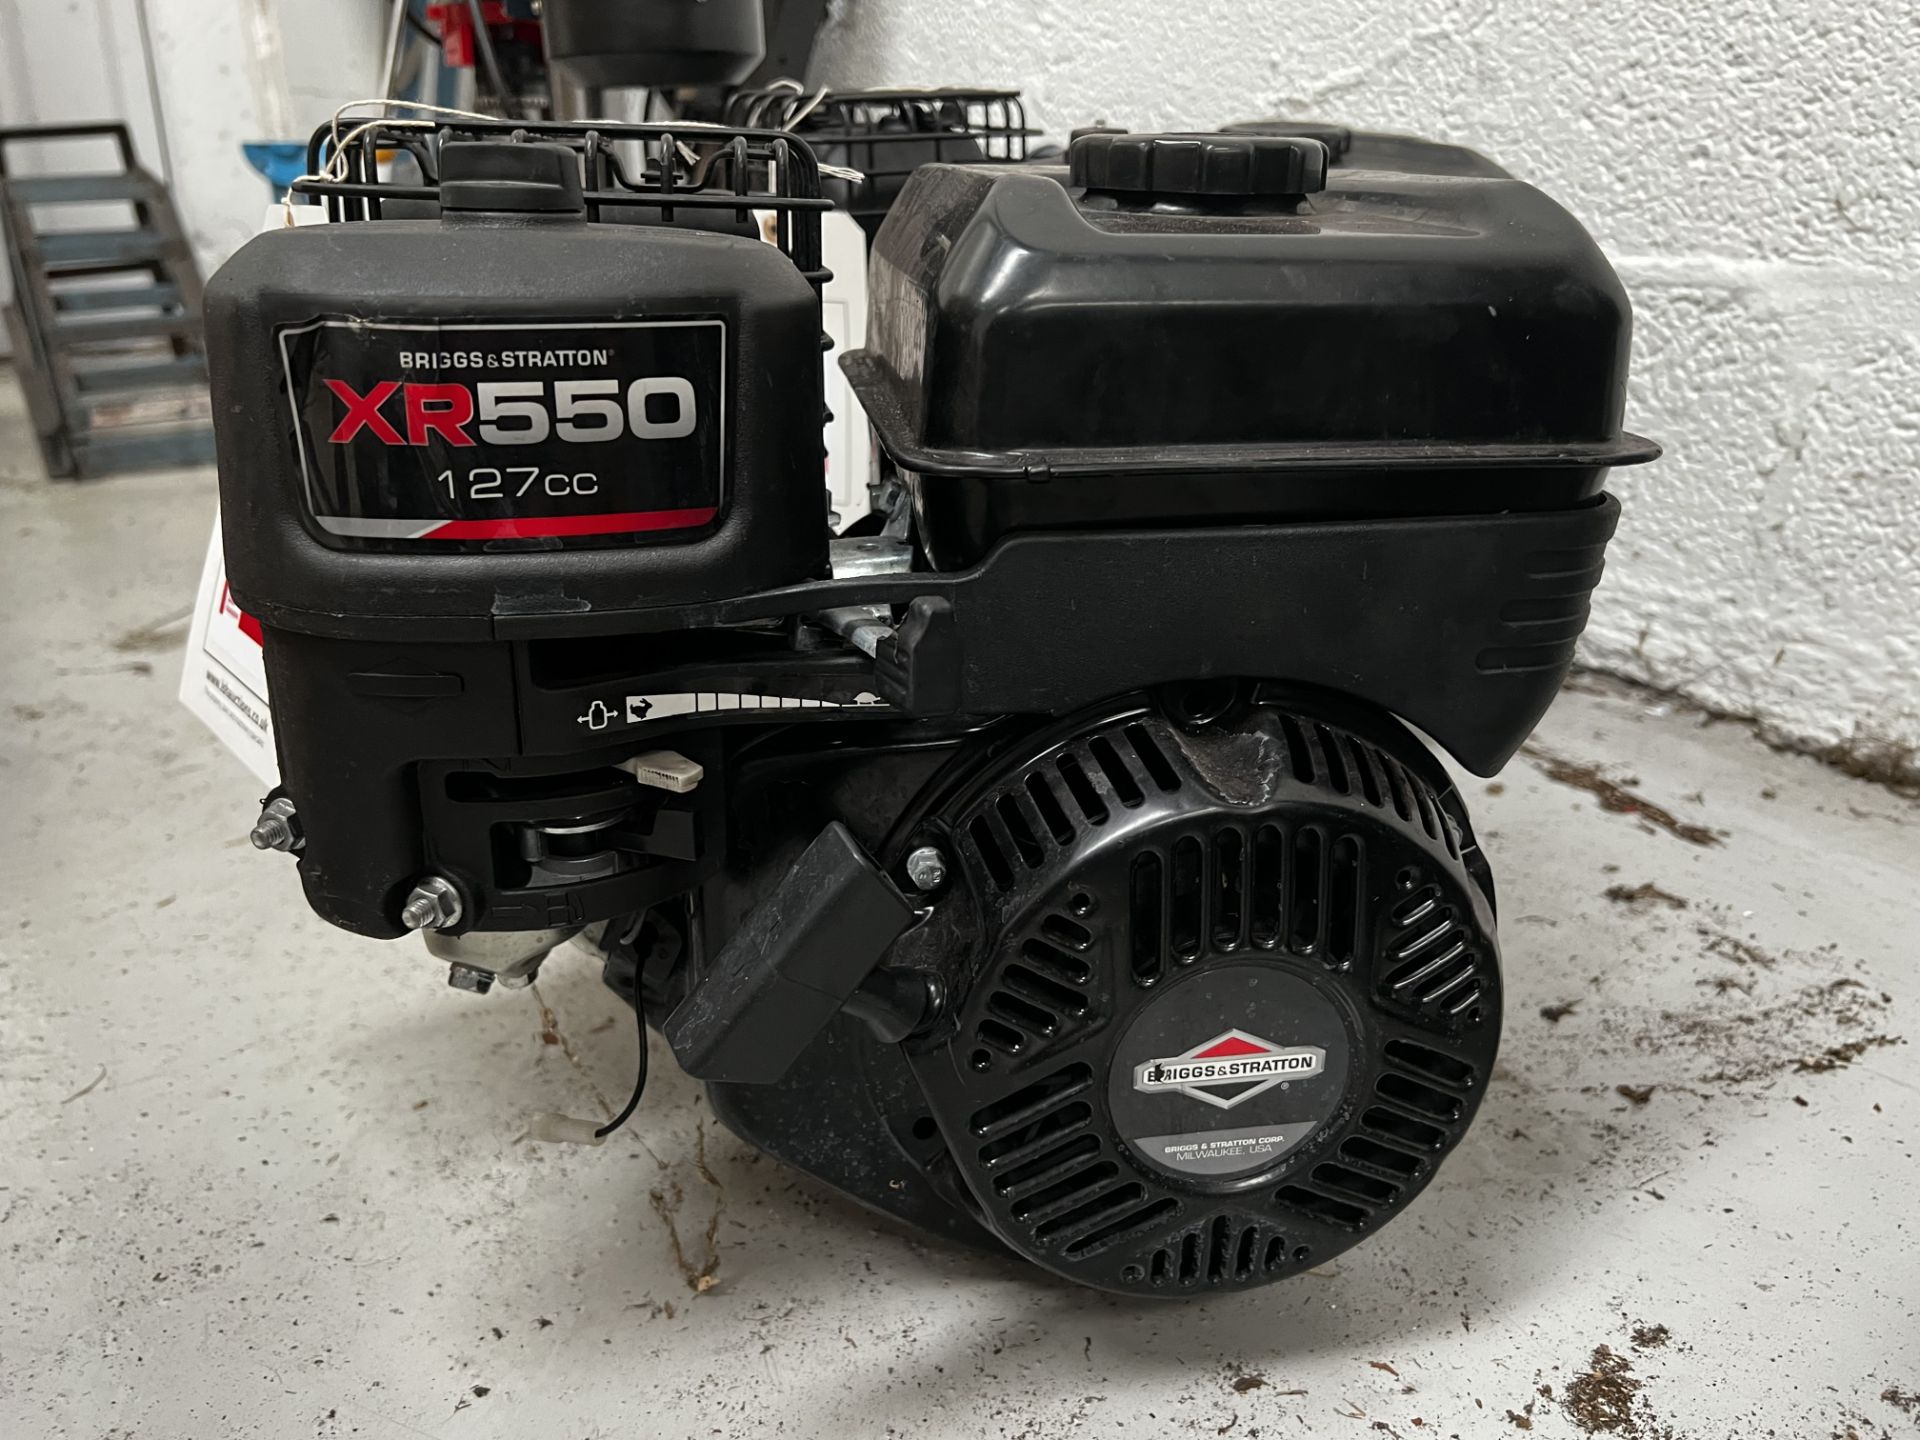 Briggs & Stratton XR550 127cc engine (This lot is located in Plympton) - Image 3 of 5